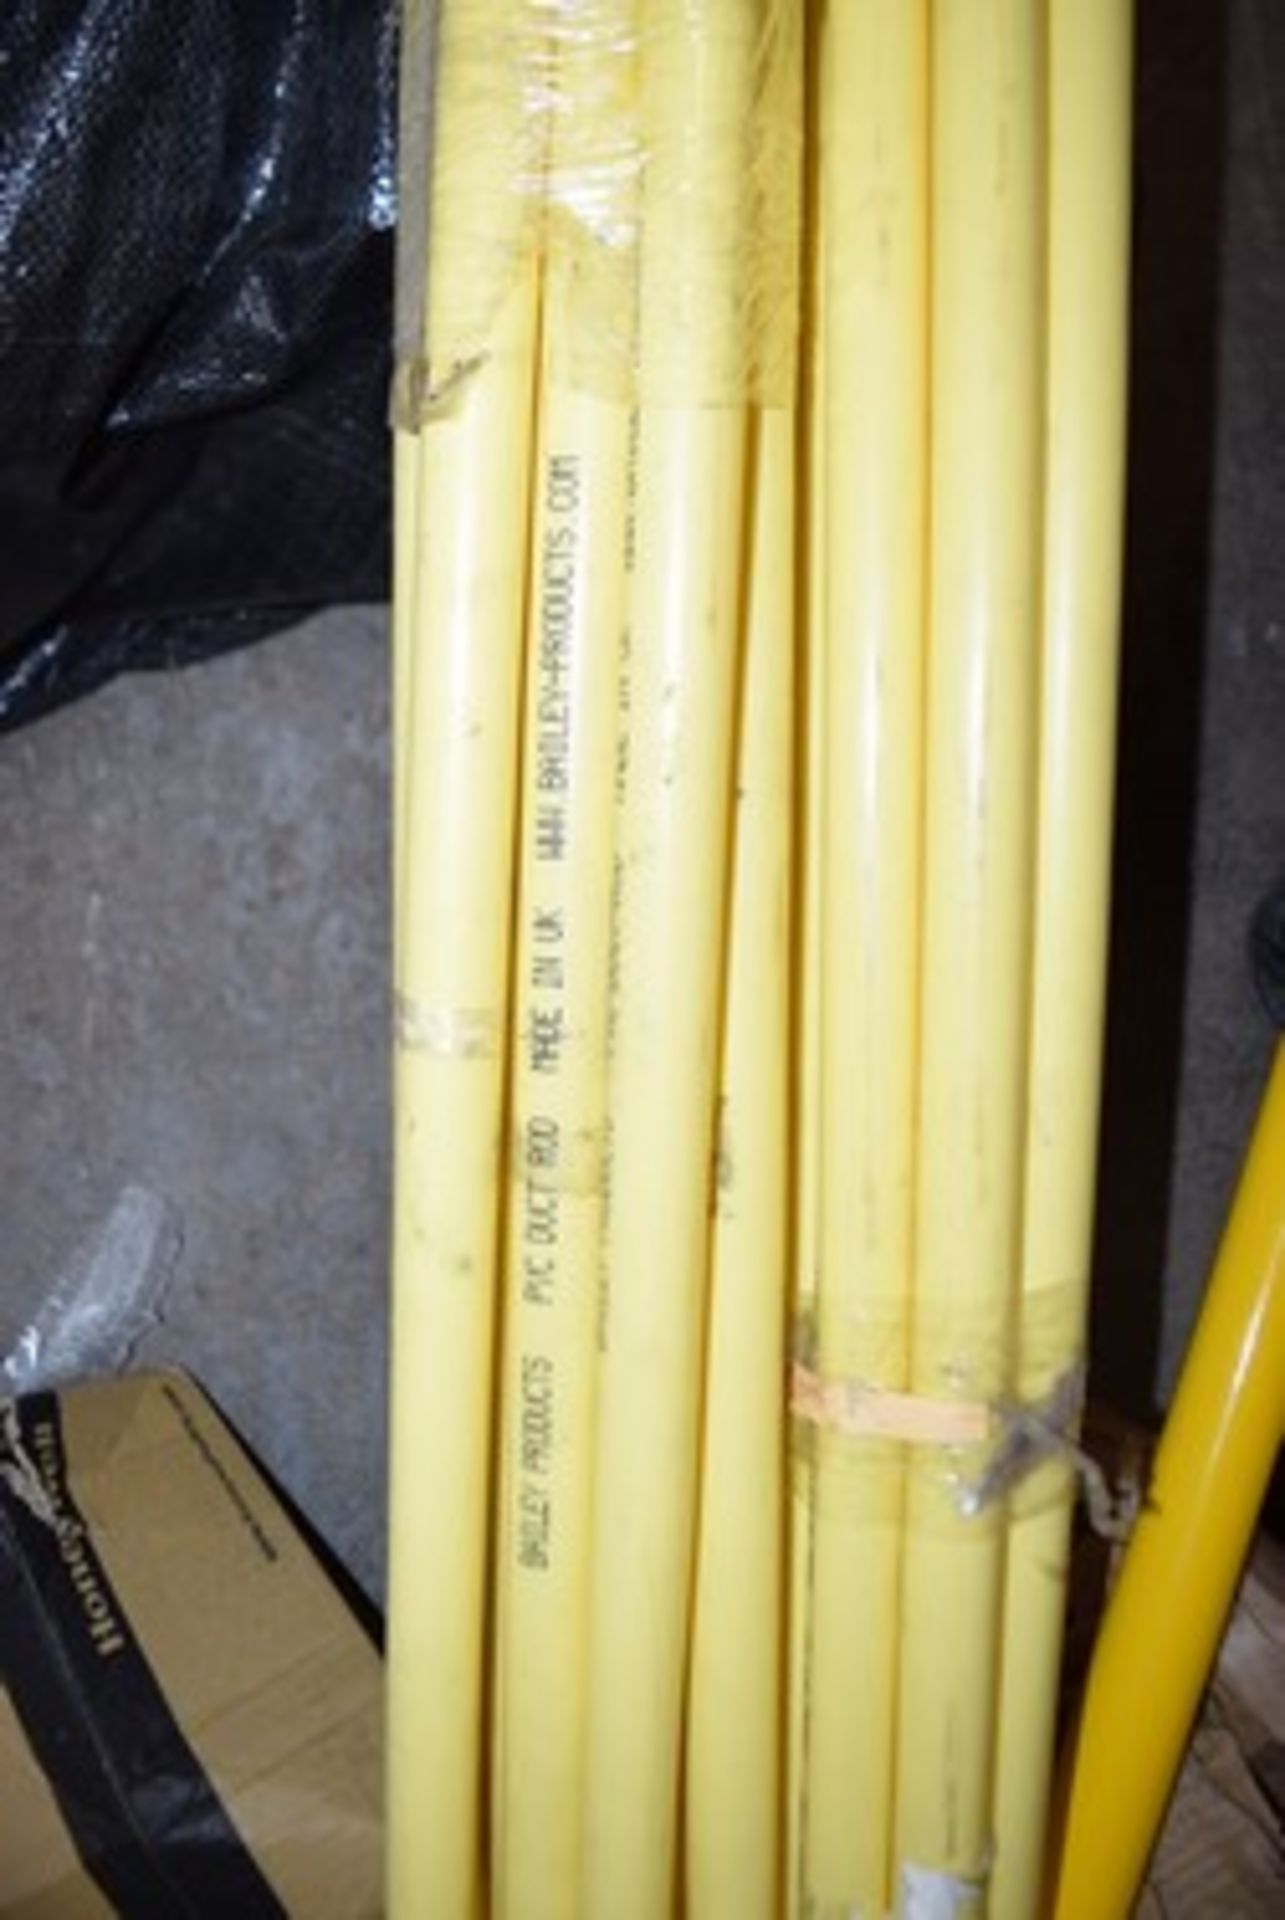 2 x bundles of 10 x Bailey products PVC duct rods and brass fittings, 3m(L) - new (SW) - Image 2 of 3